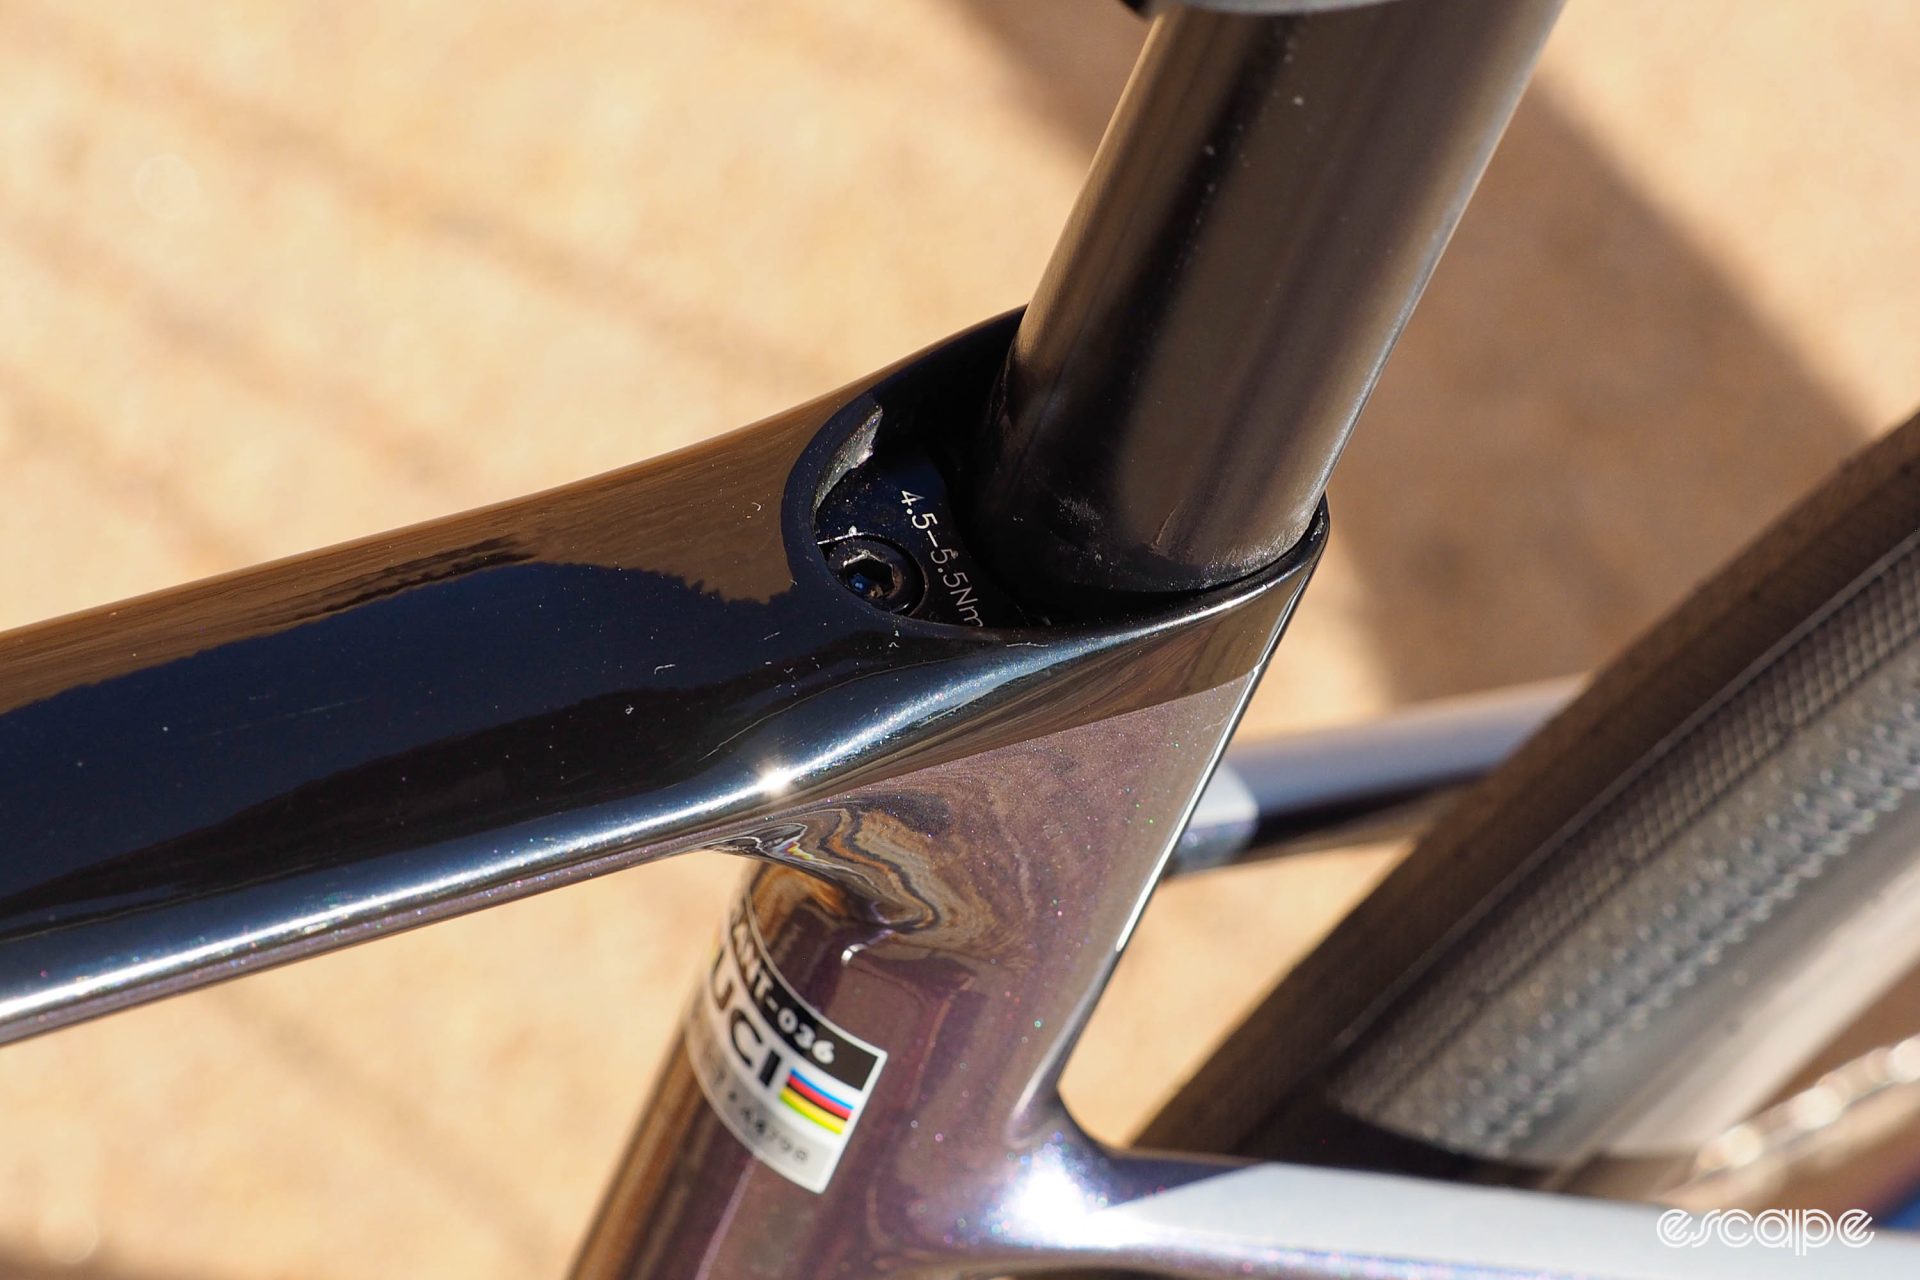 With the rubber cover removed, this view shows the seat post clamp mechanism, a wedge-style binder tucked slightly below the level of the top tube.